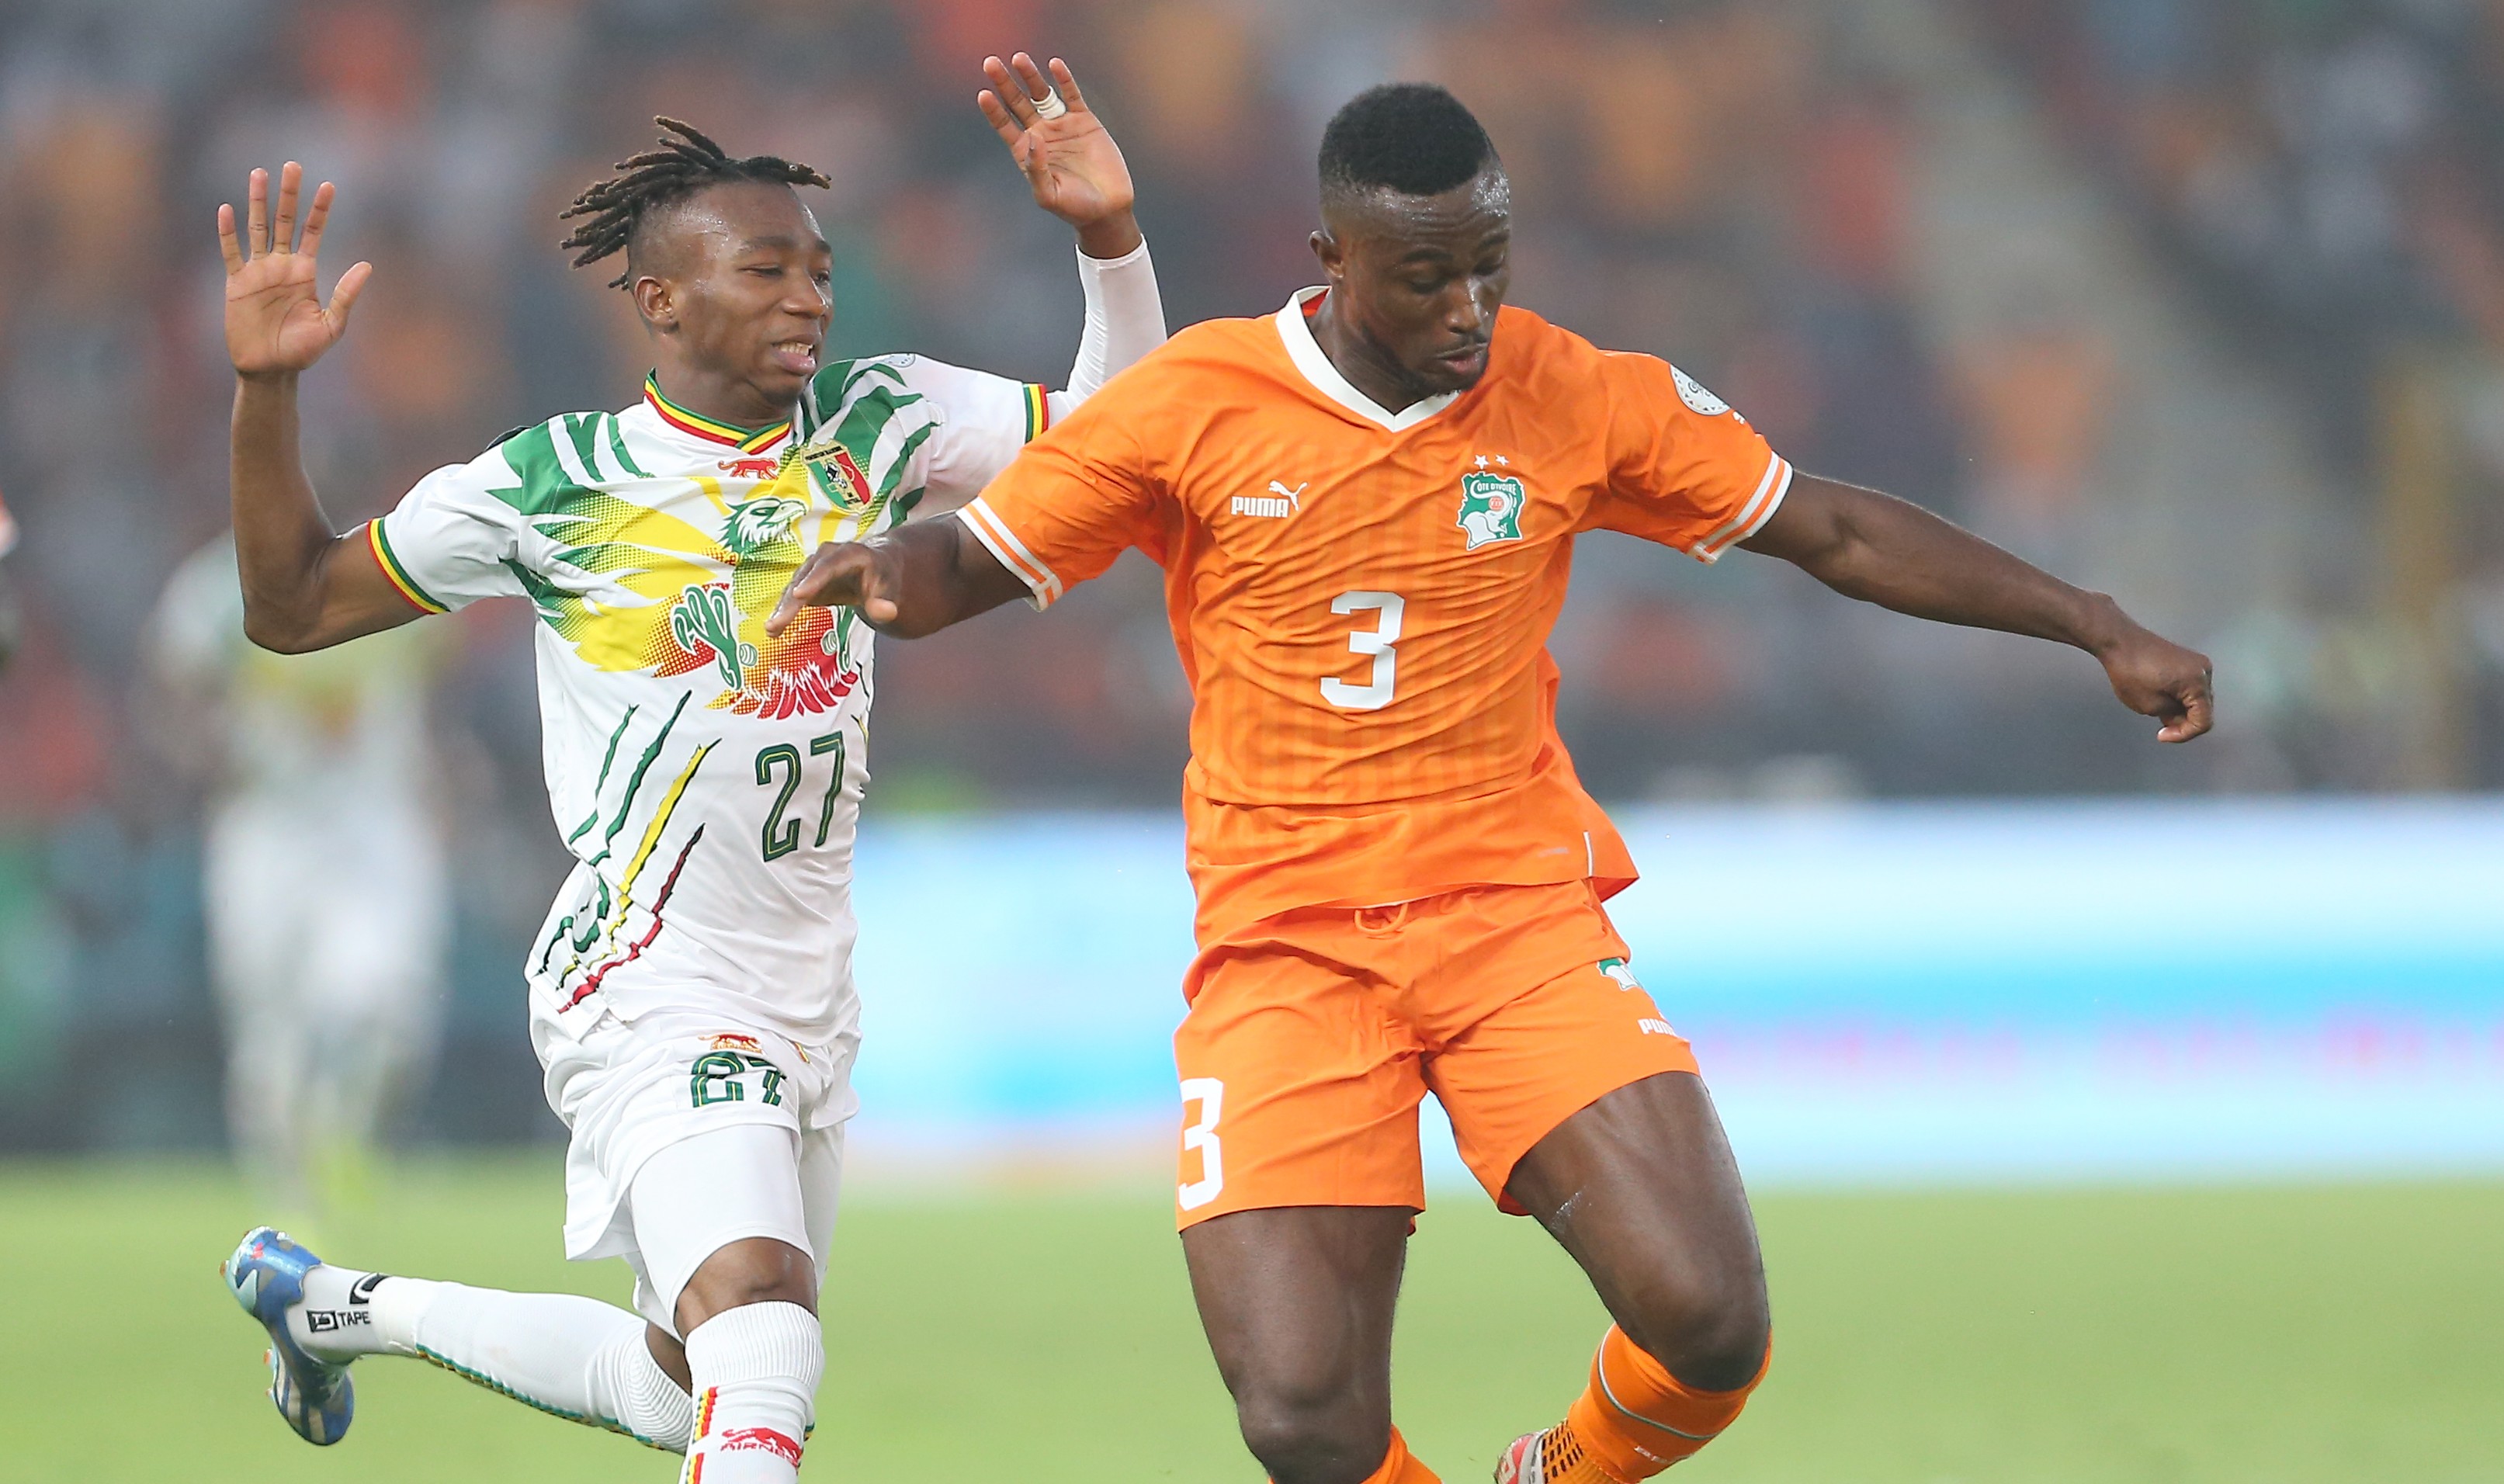 https://fr.cafonline.com/media/s0zcmynq/ghislain-konan-of-cote-divoire-r-challenges-nene-dorgeles-of-mali-l-during-the-2023-africa-cup-of-nations-match-between-mali-and-ivory-coast.jpg